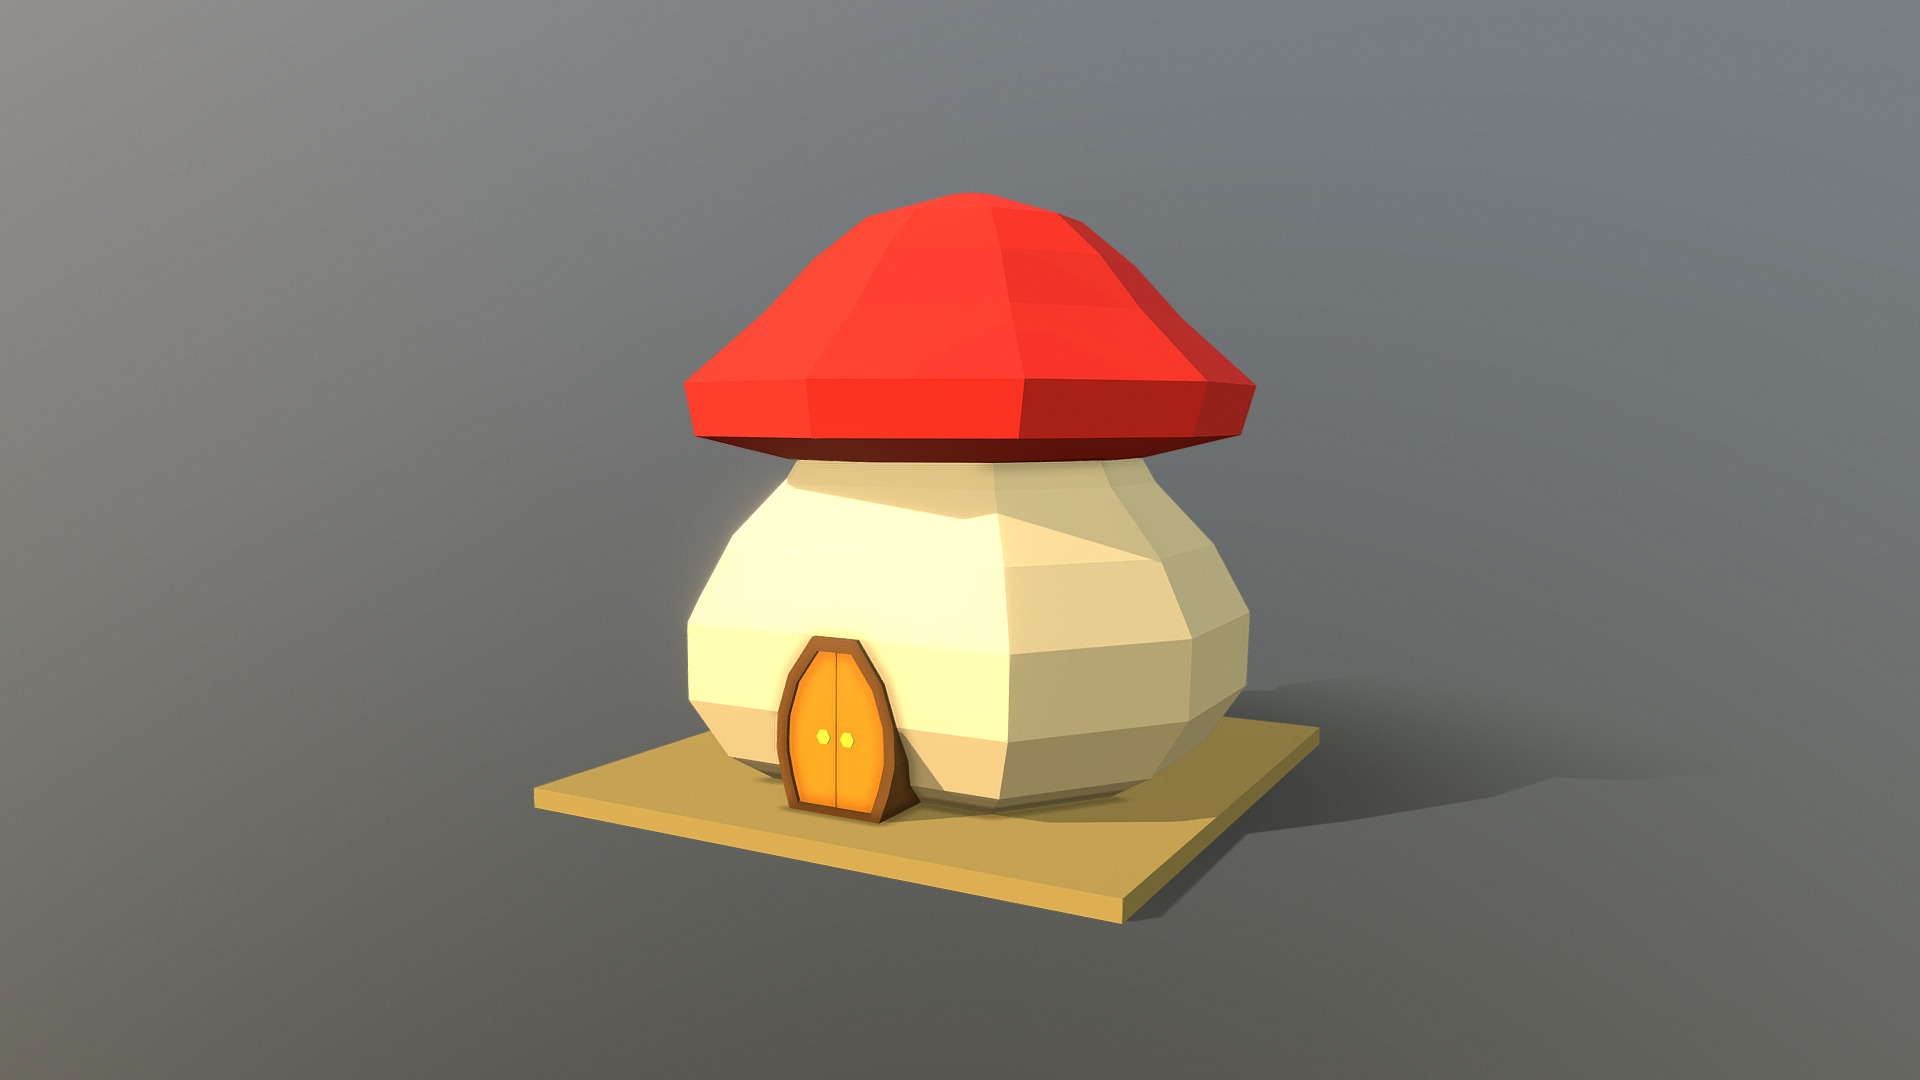 3D model HIE Mushroom House N1 - This is a 3D model of the HIE Mushroom House N1. The 3D model is about a small house with a red hat.